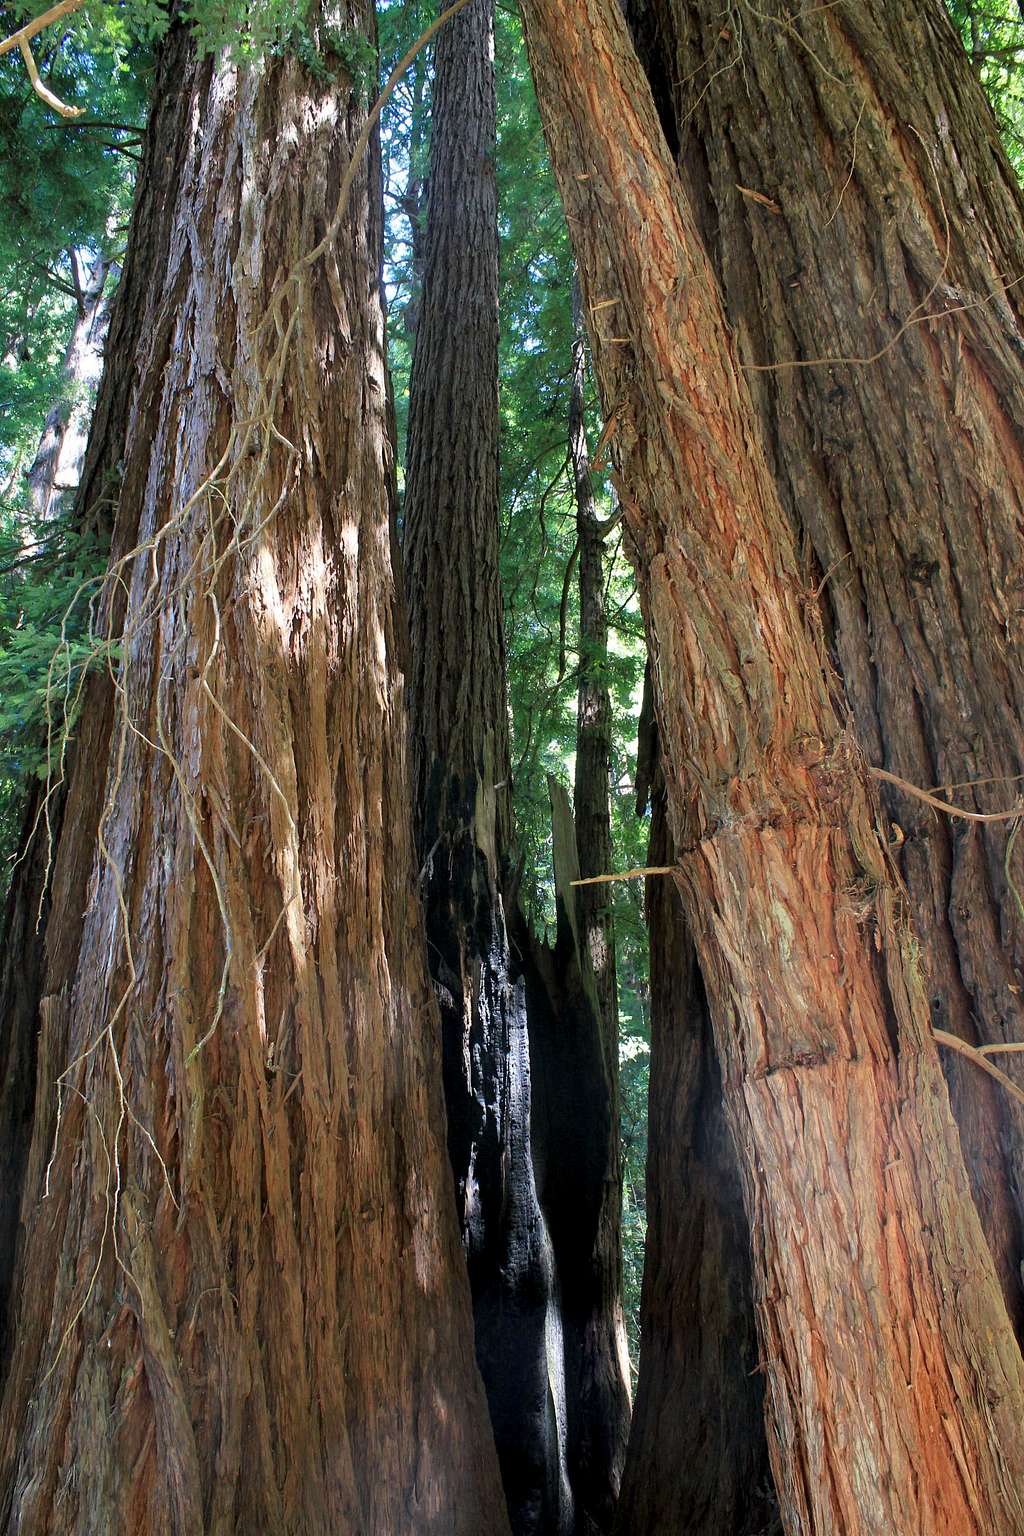 Muir Woods National Monument New Growths from Ancient Redwood